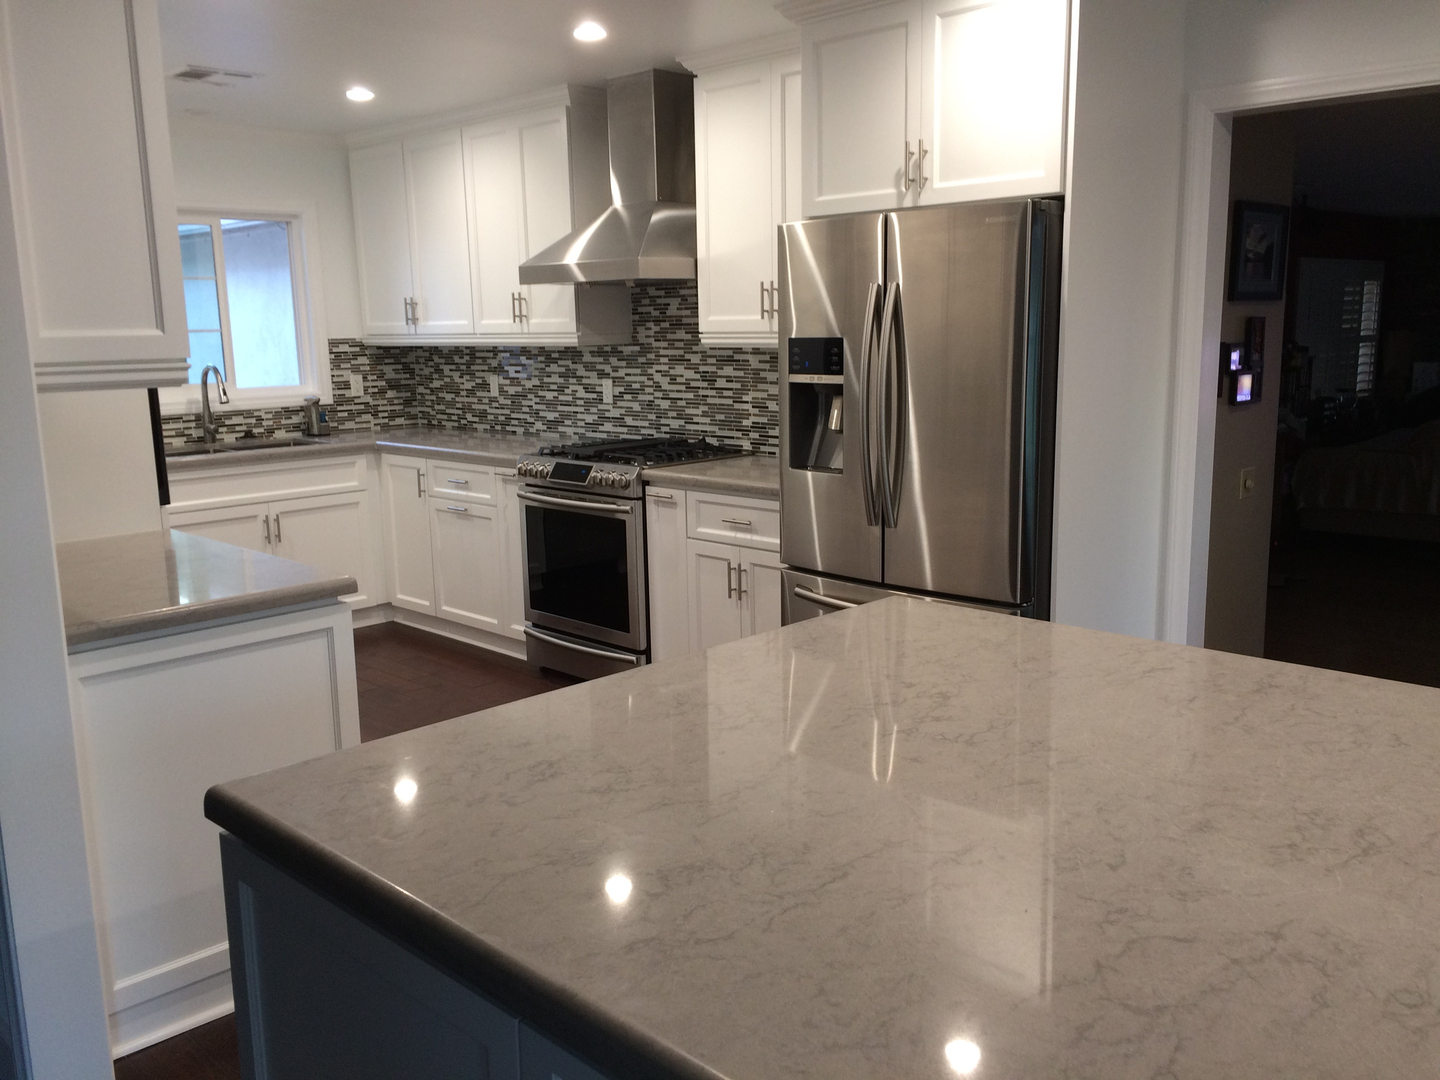 Kitchen with marble countertop